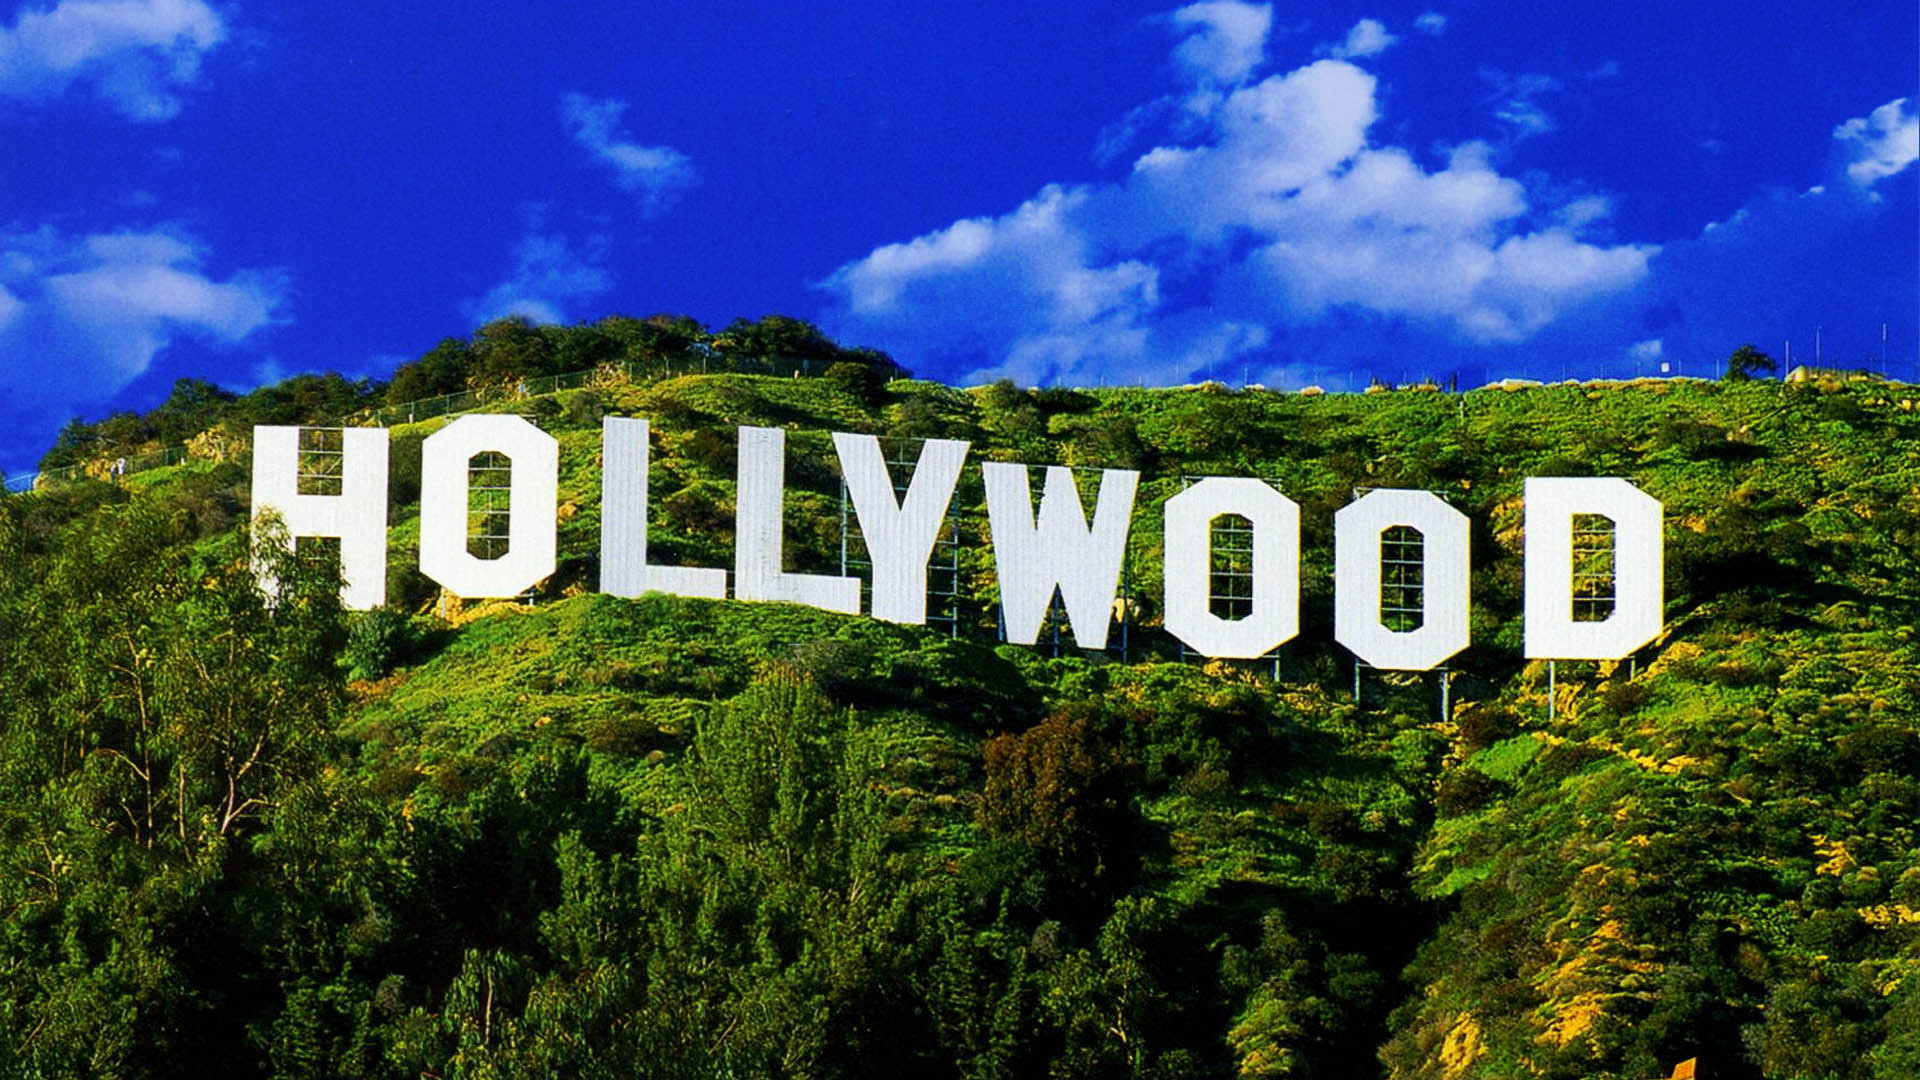 Hollywood Wallpaper - HD Wallpapers Backgrounds of Your Choice